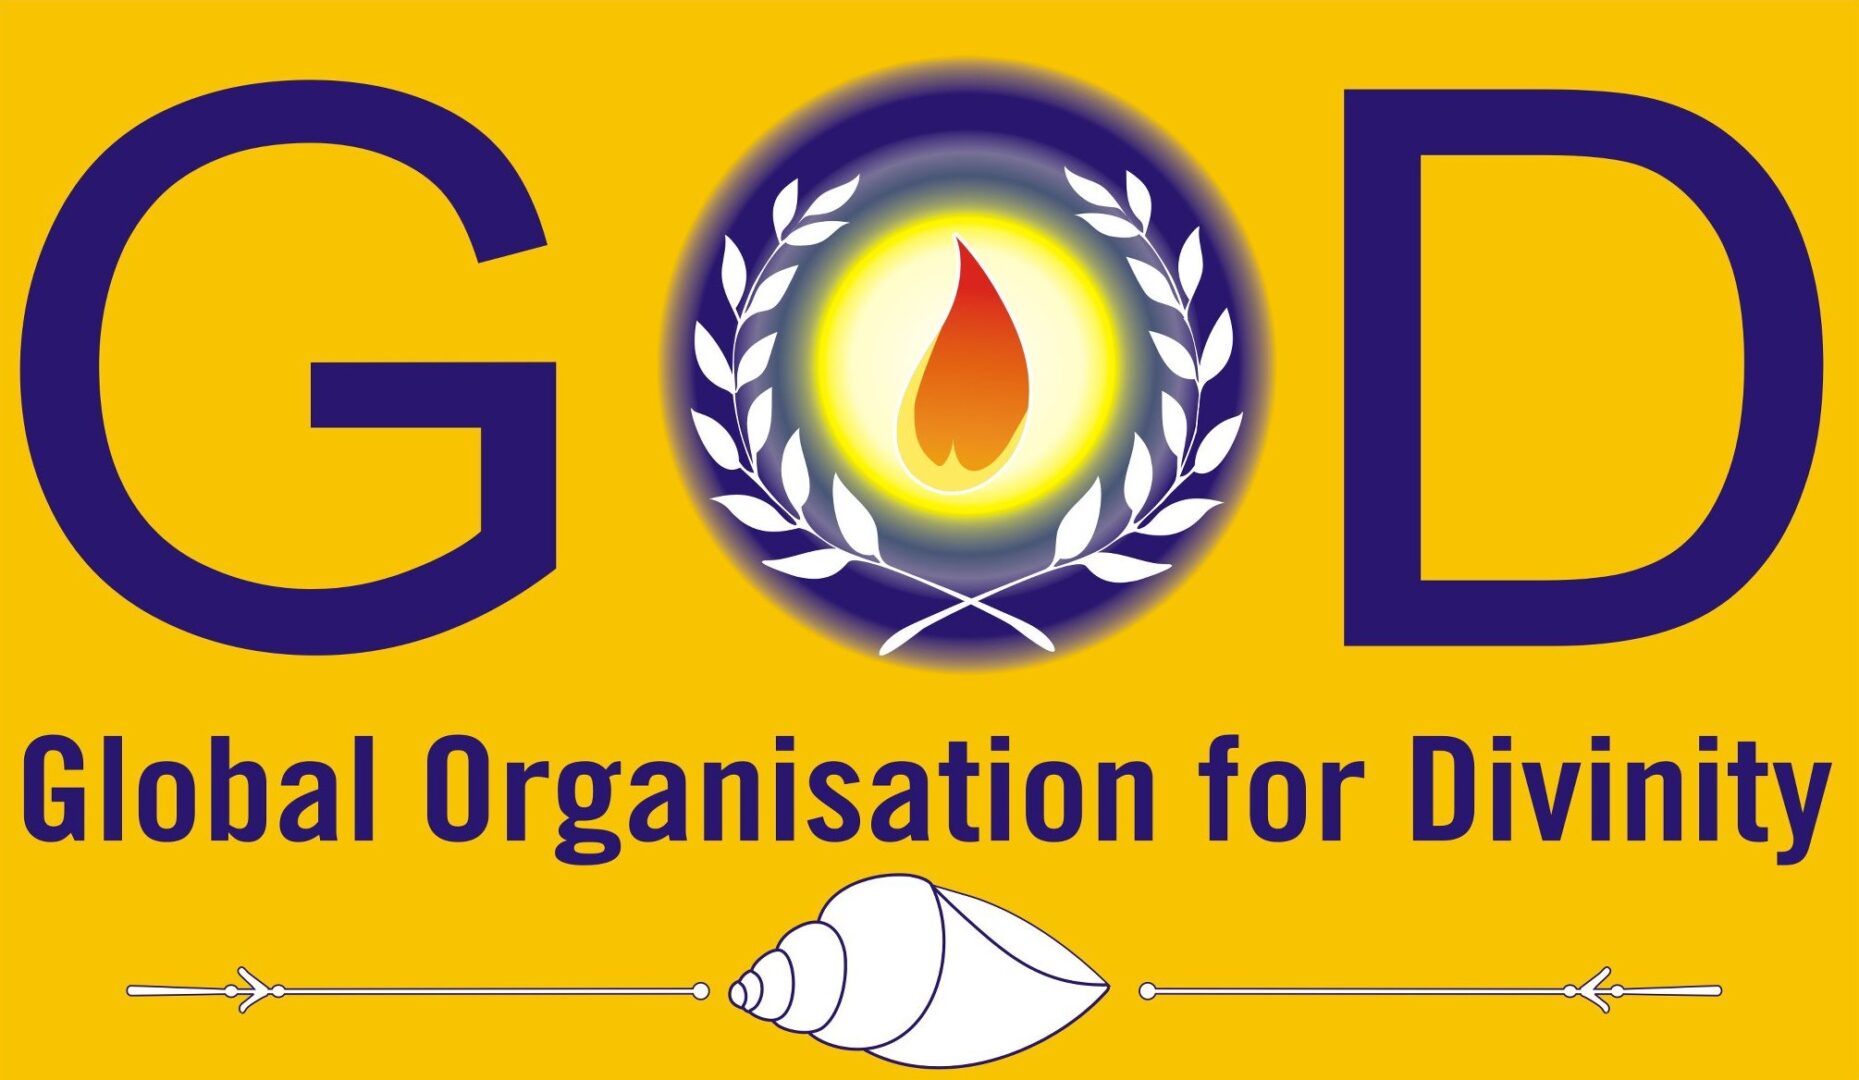 http://Global%20Organization%20of%20Divinity